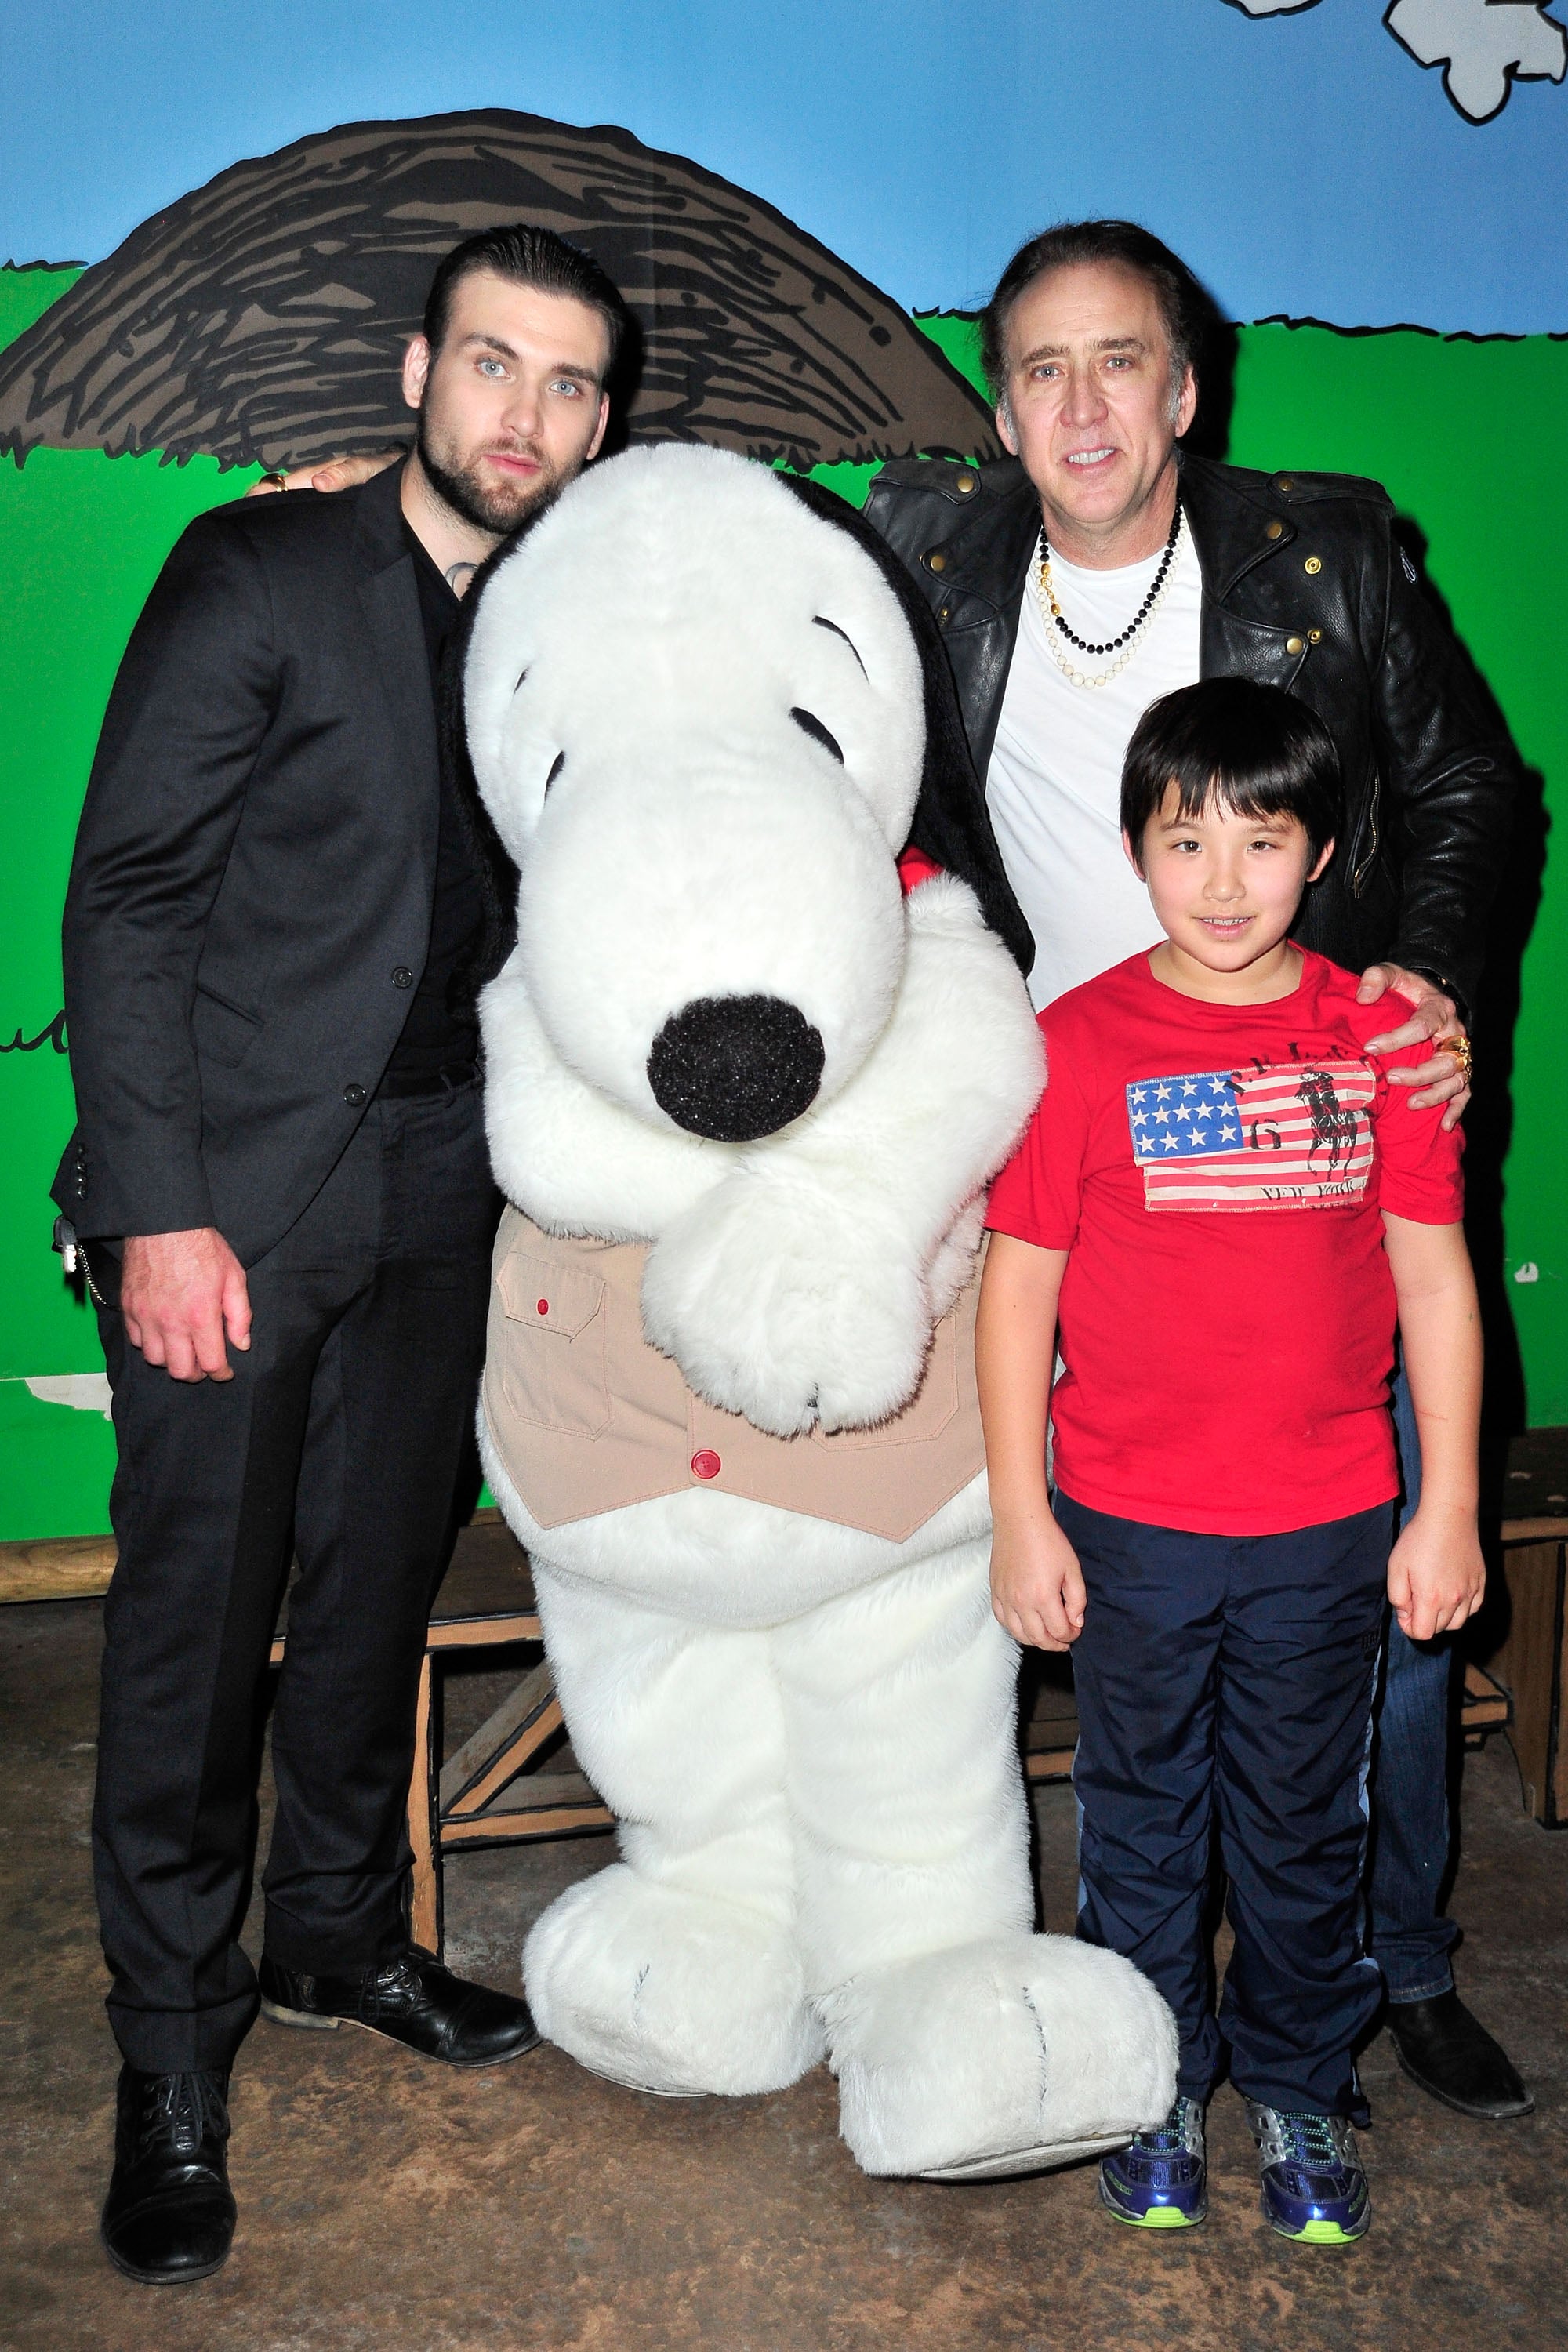 BUENA PARK, CA - SEPTEMBER 12:  Actor Nicholas Cage visits Knott's Berry Farm with sons Weston (L) and Kal-El on September 12, 2015 in Buena Park, California.  (Photo by Jerod Harris/Getty Images)